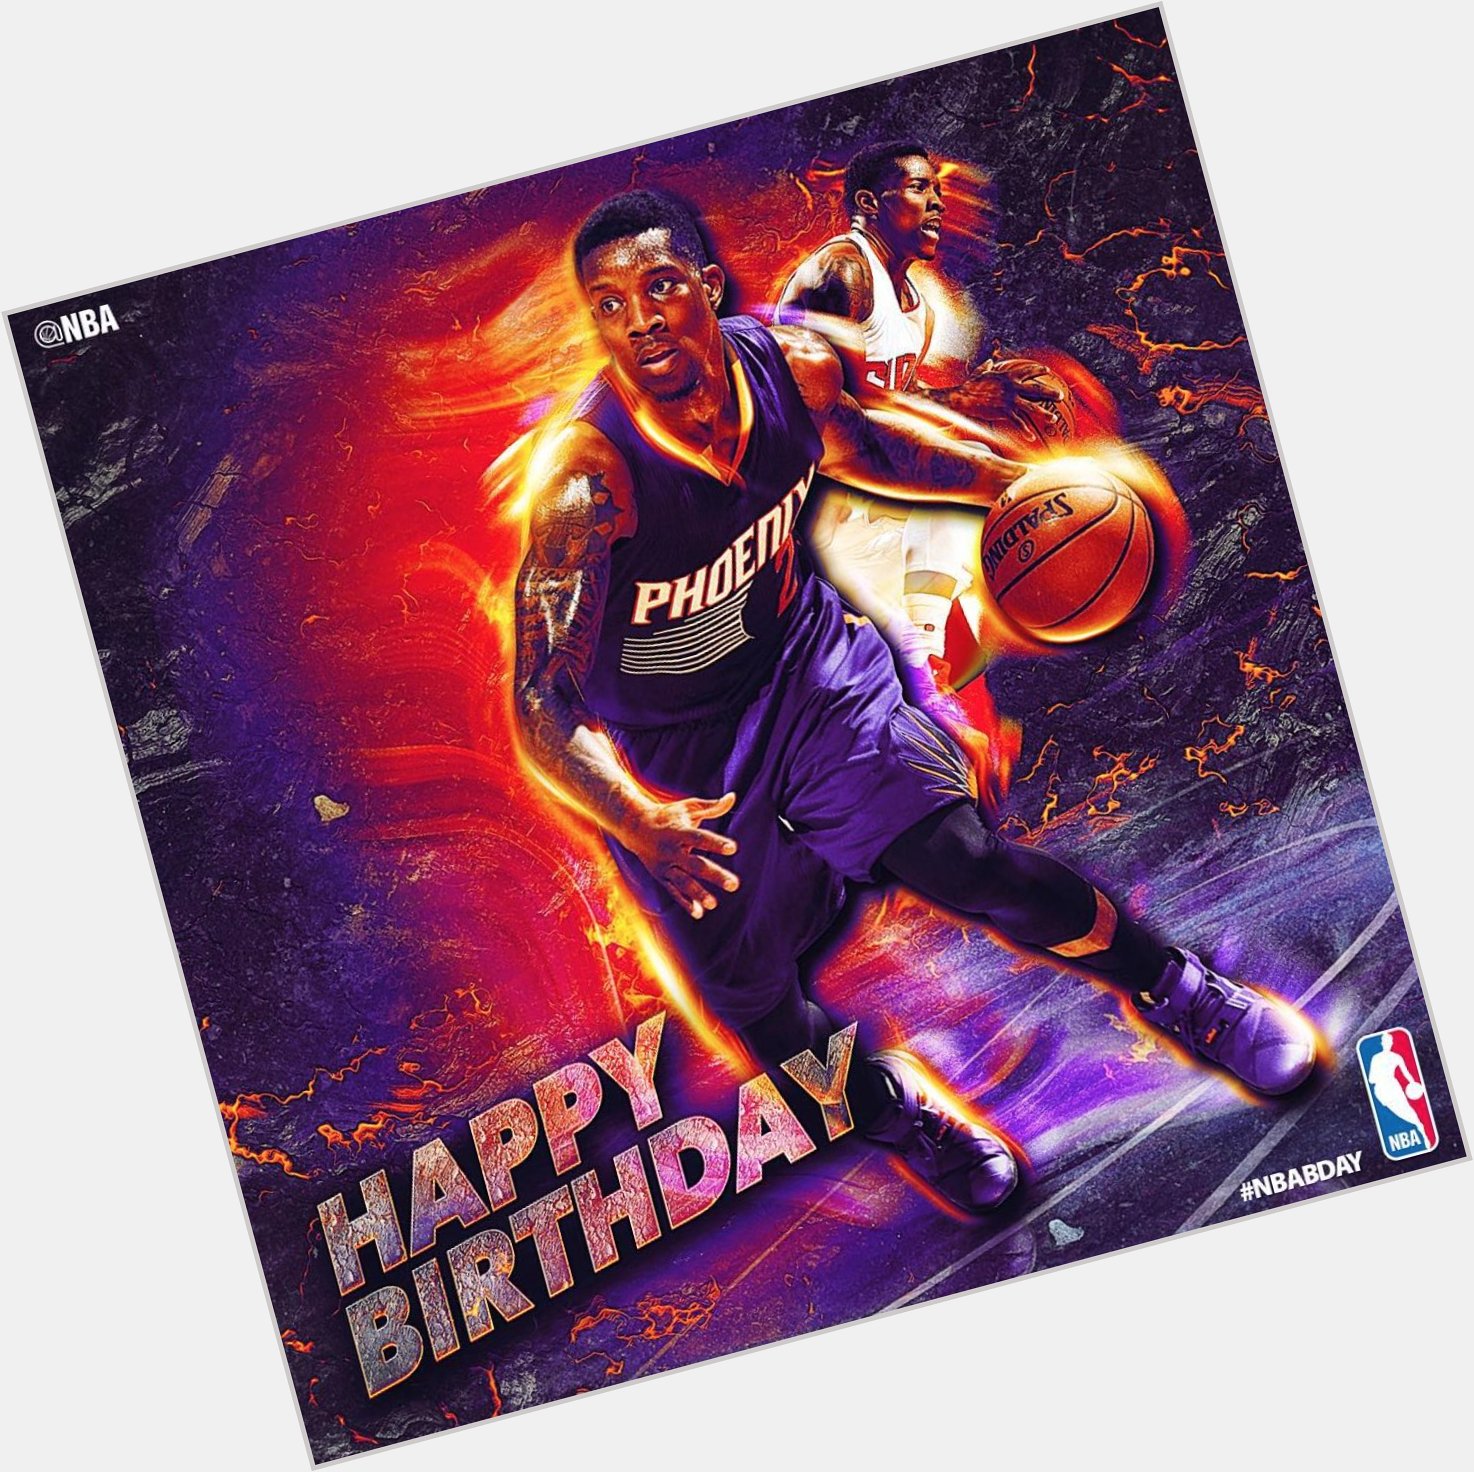 Happy birthday to our guy Eric Bledsoe!  